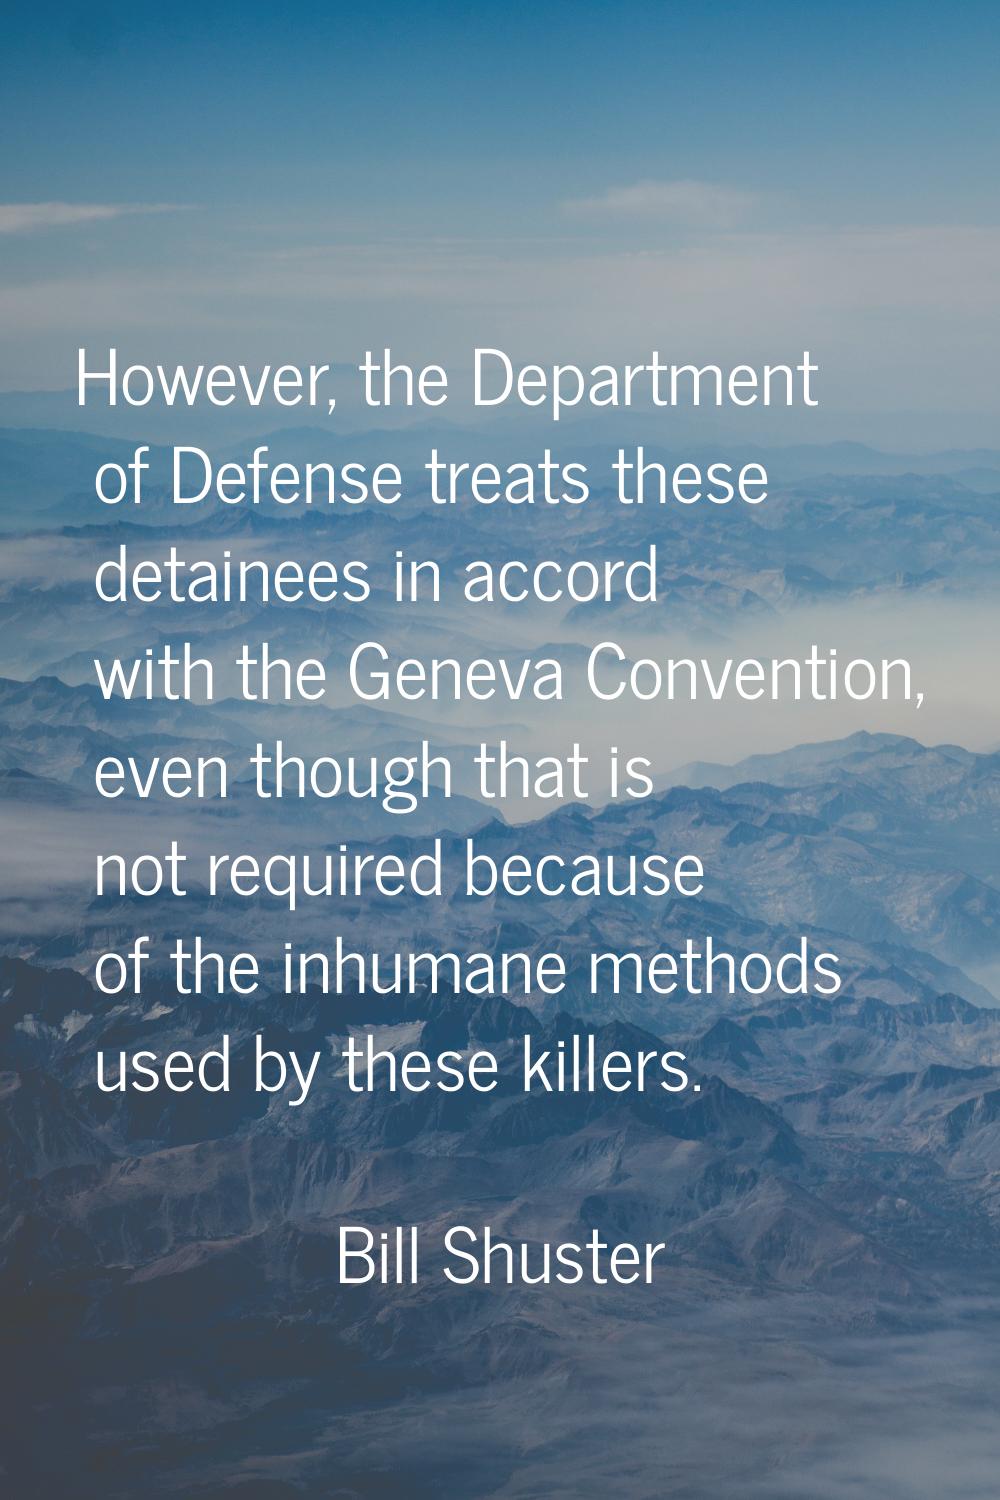 However, the Department of Defense treats these detainees in accord with the Geneva Convention, eve